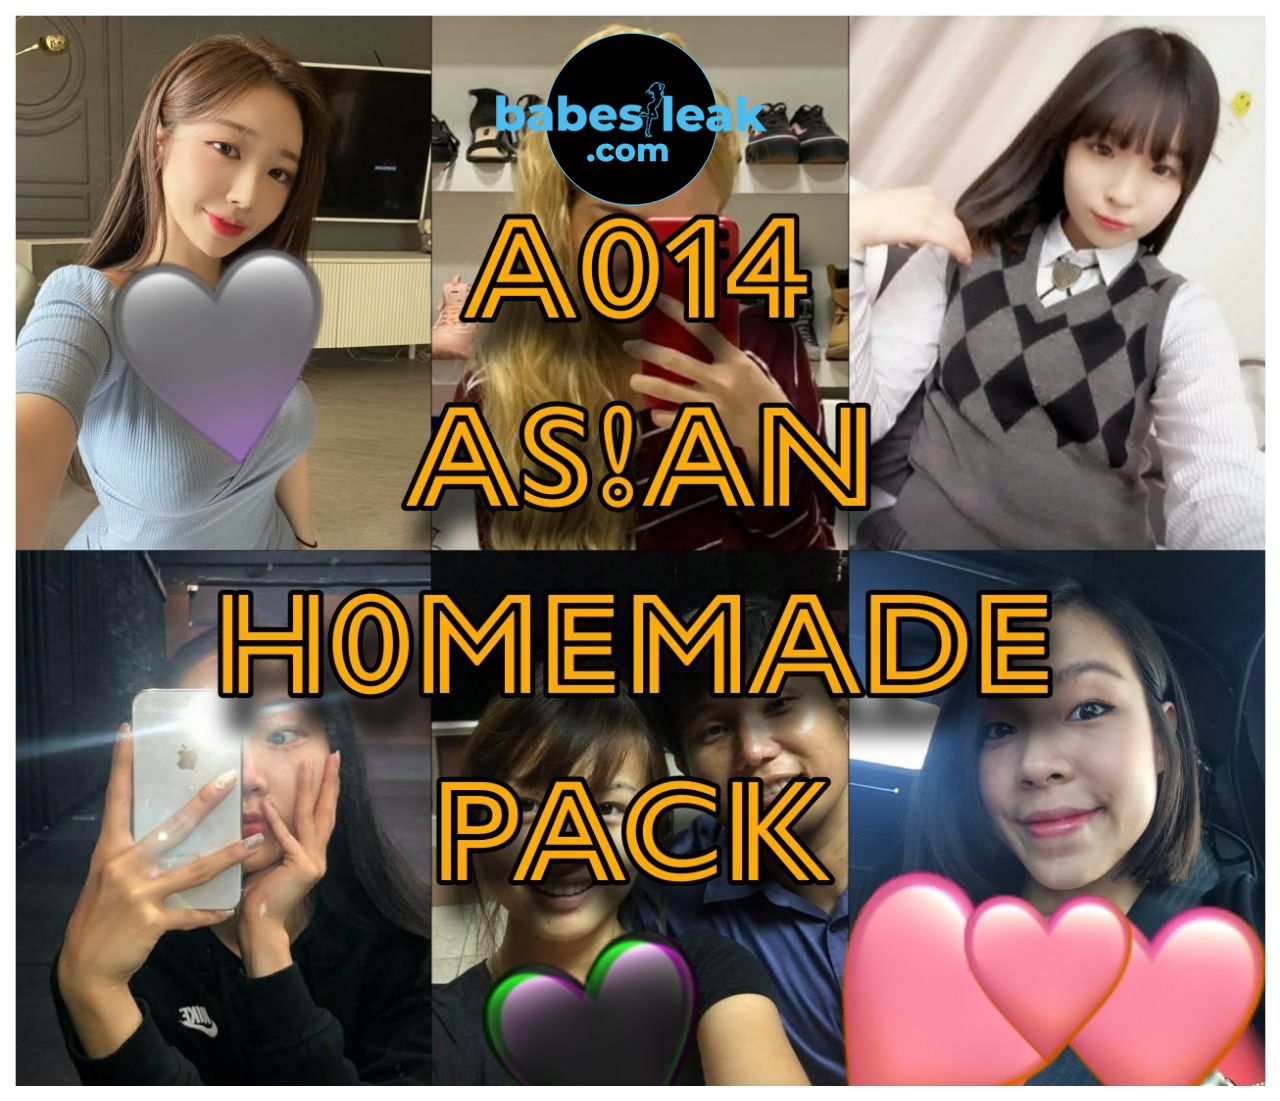 Asian Homemade Pack - A014 - statewins hlb leak